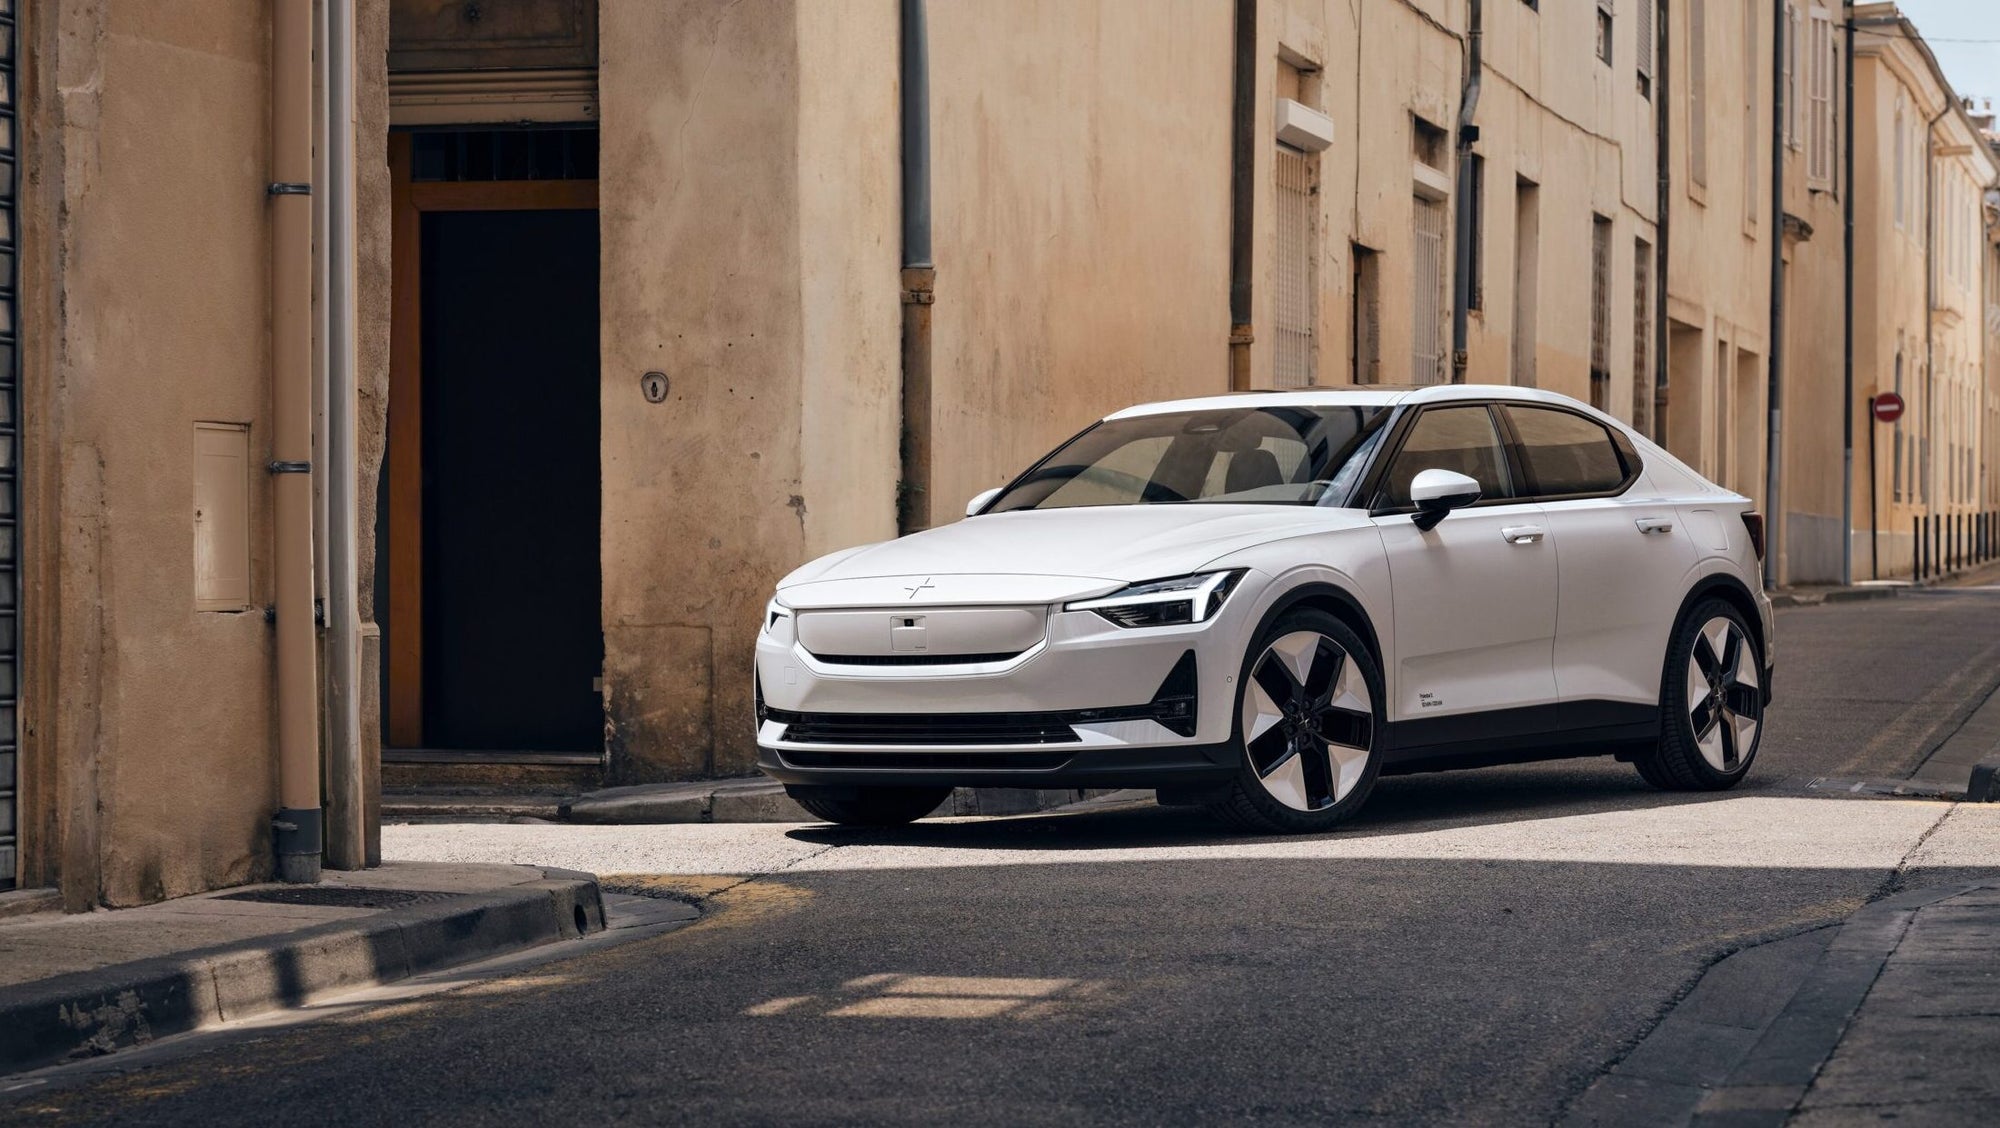 The Polestar 2 lease price has dropped to $299 per month, which is actually quite a good deal.